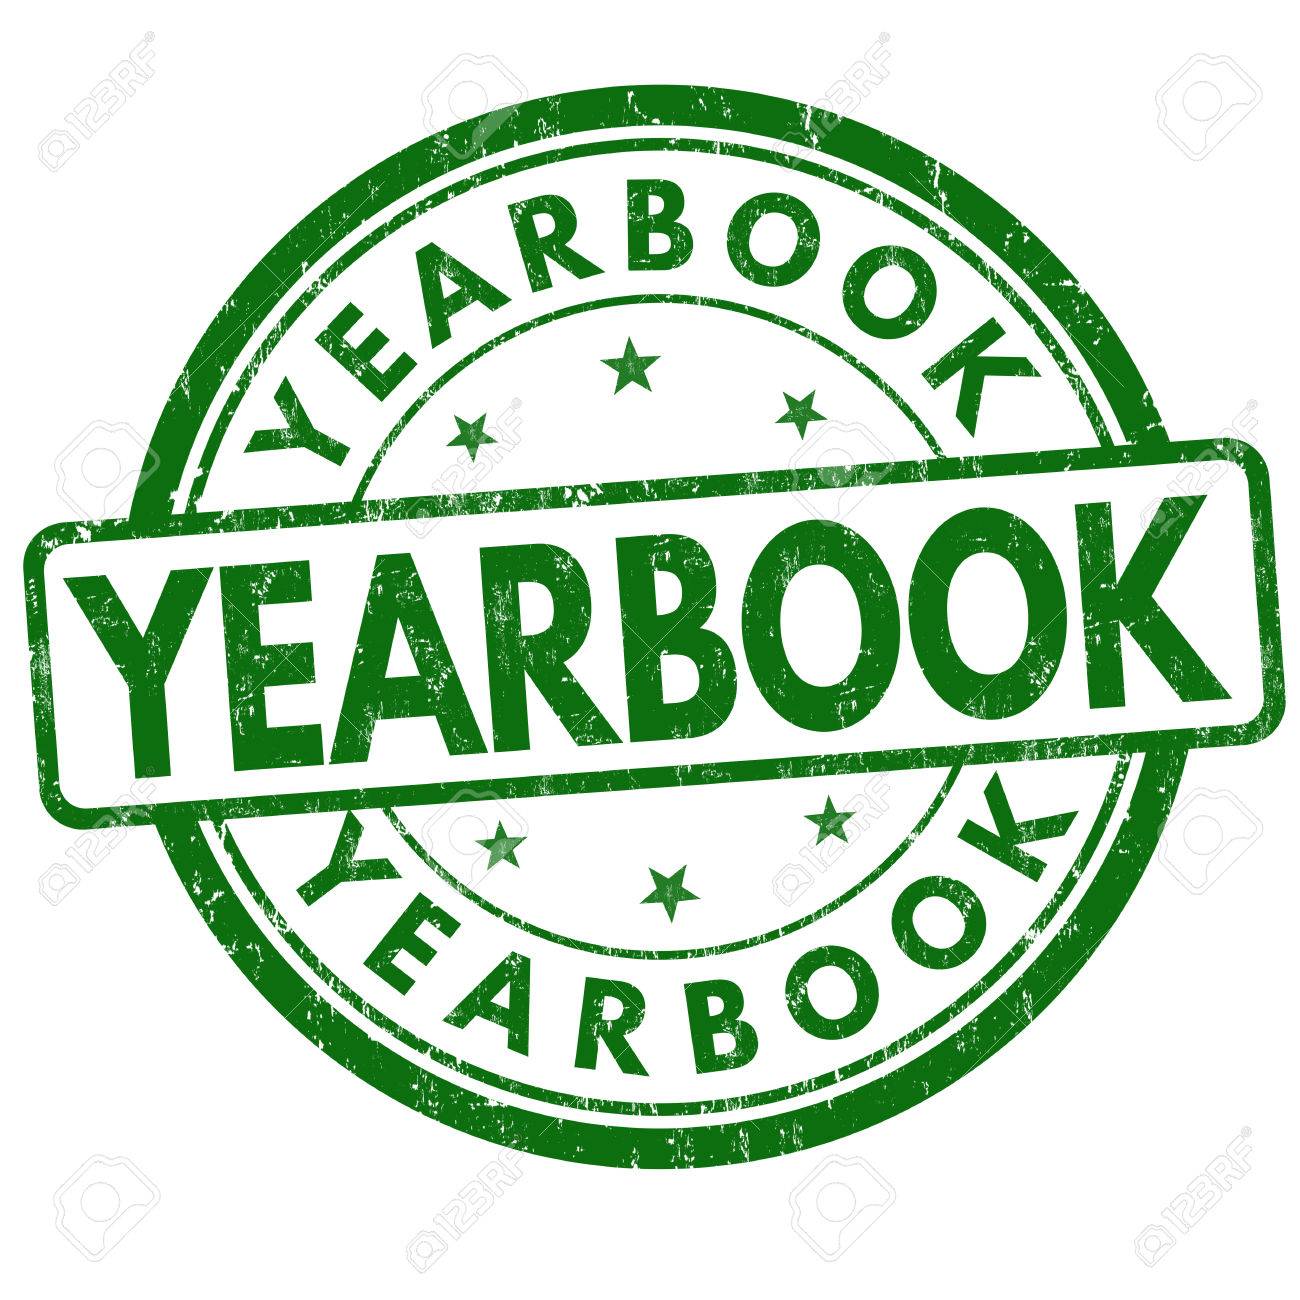 yearbook clipart